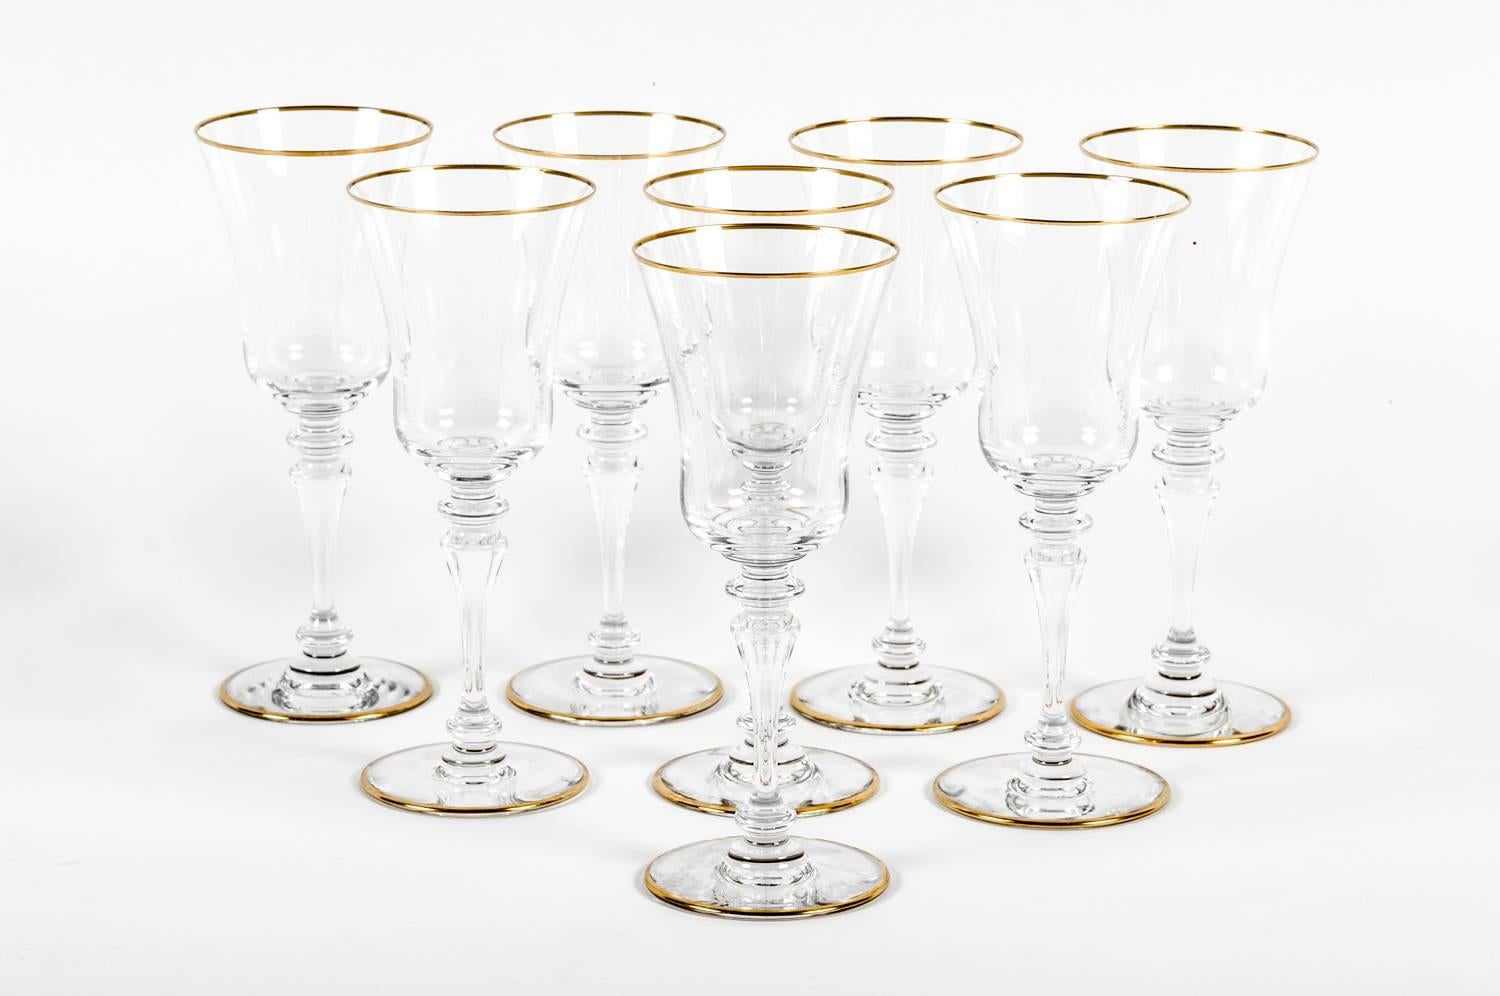 Vintage set of ten Baccarat wine water glassware. Excellent condition. Each glass measure 9 inches high x 3.8 inches top diameter. The picture showed eight but the set is ten glasses.